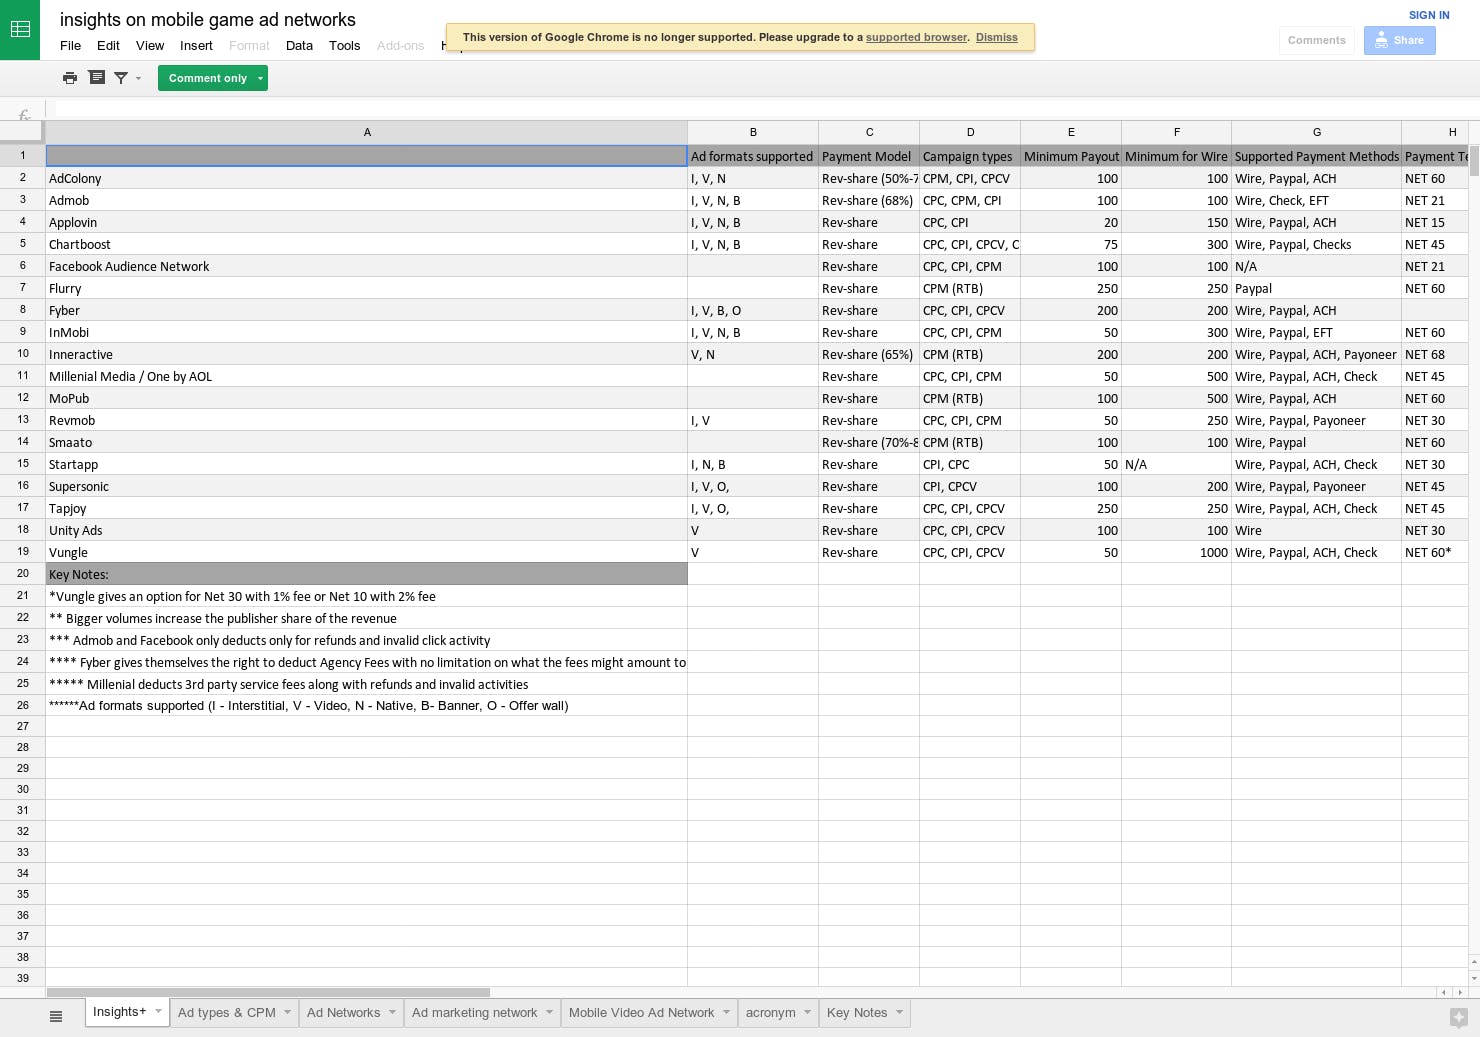 google spreadsheet w/ insights on mobile game ad networks media 2